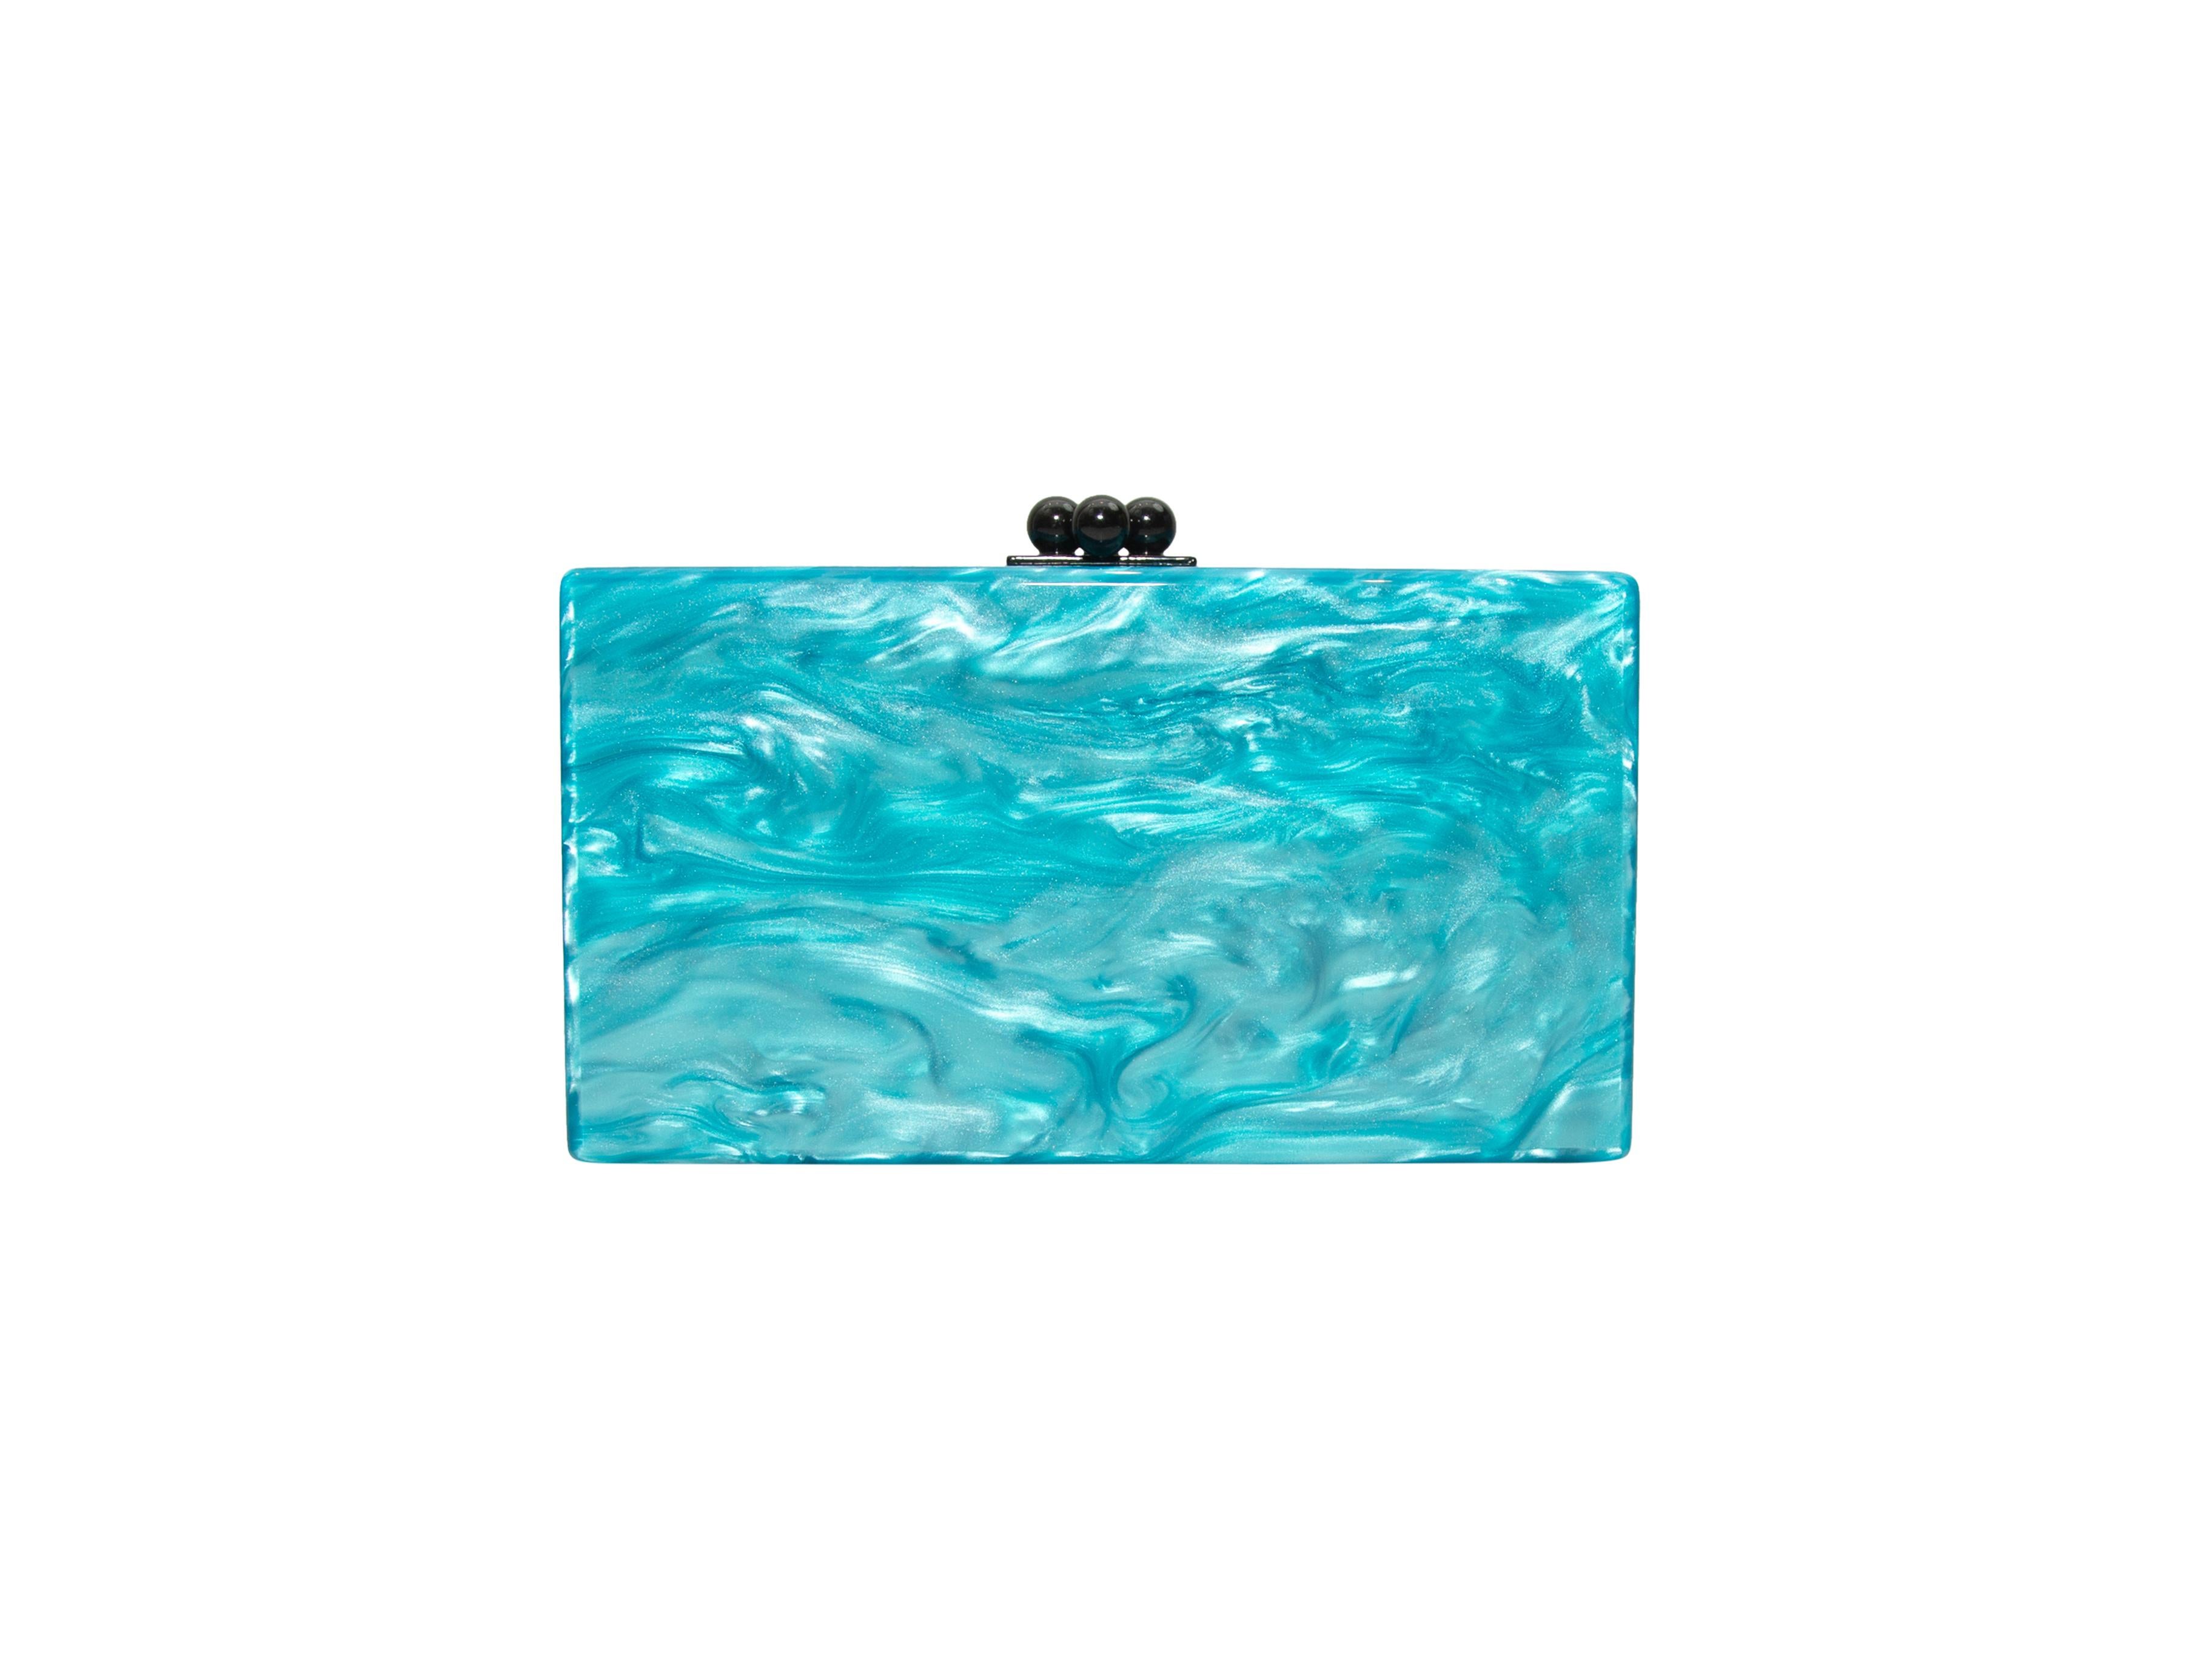 Edie Parker Teal & Navy Acrylic Hard Shell Clutch 1